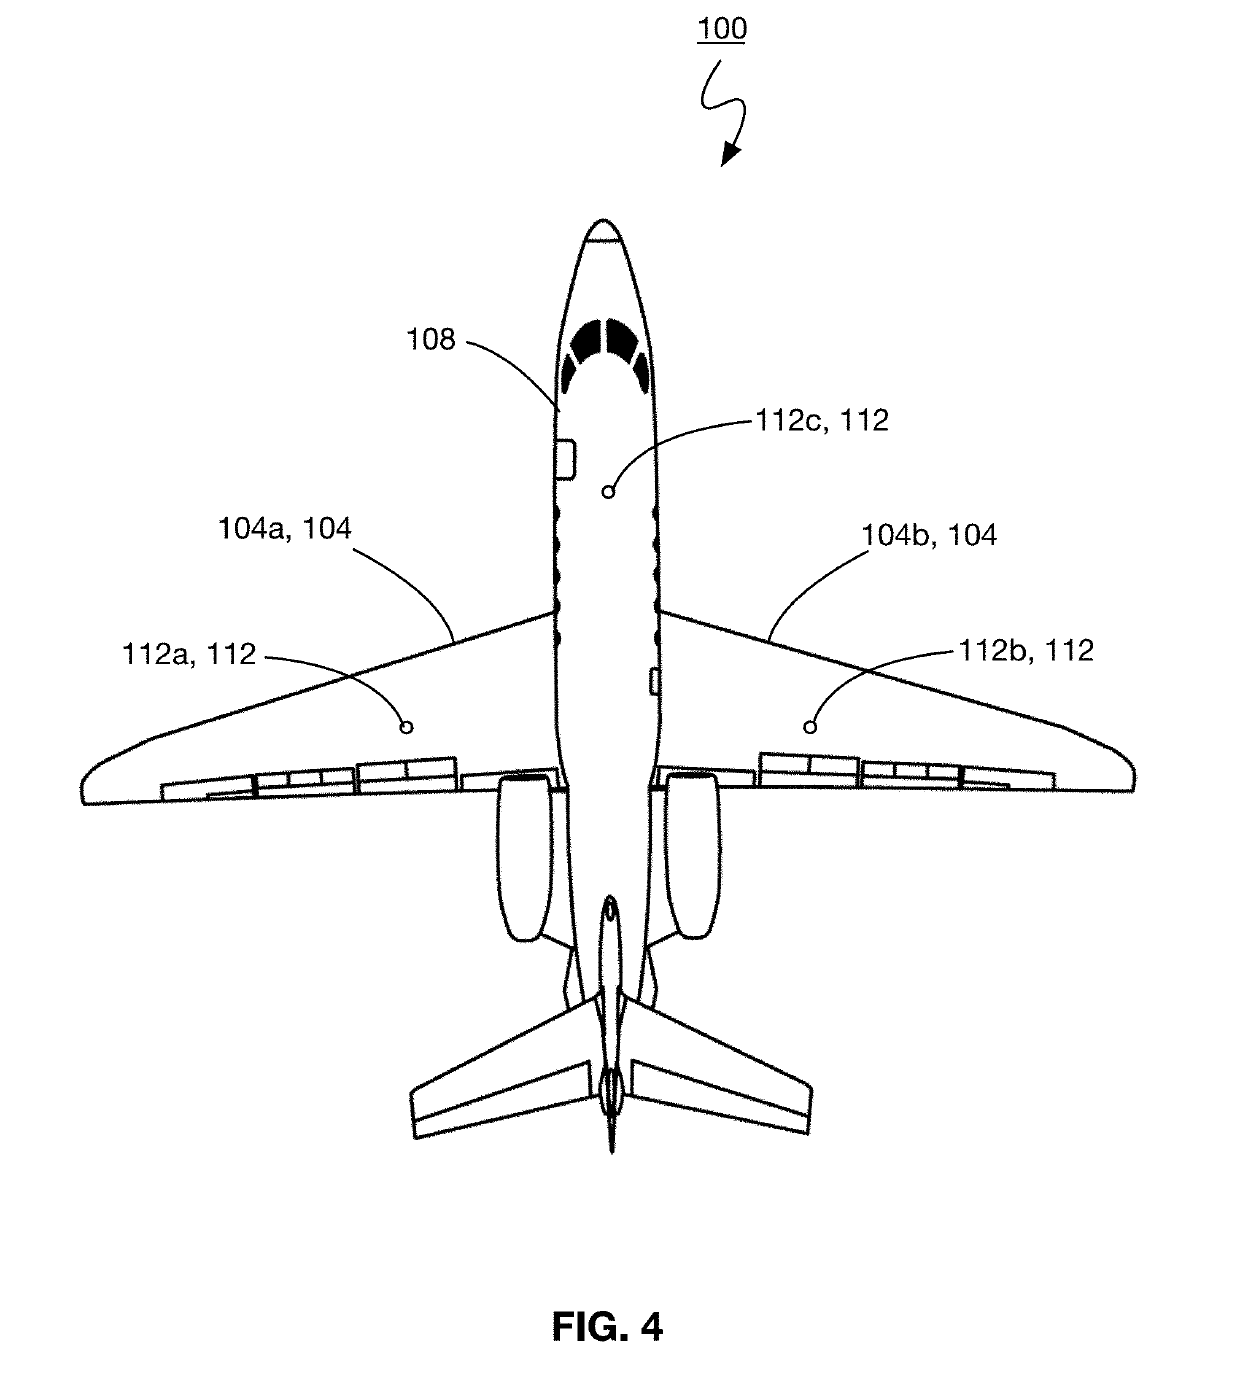 System and method for capturing and releasing fixed-wing aircraft